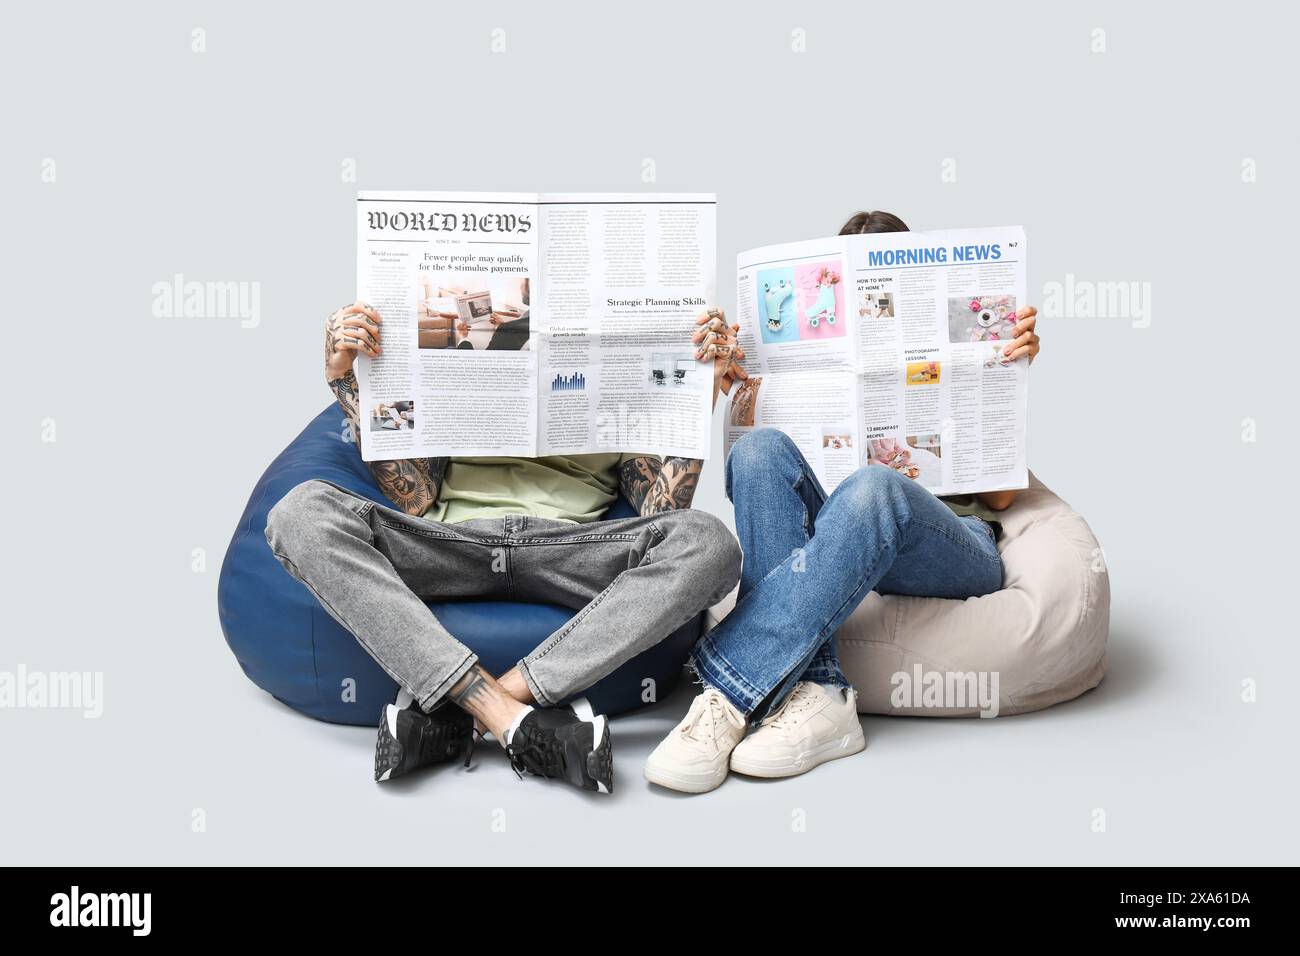 Couple in beanbag chairs with newspapers on grey background Stock Photo